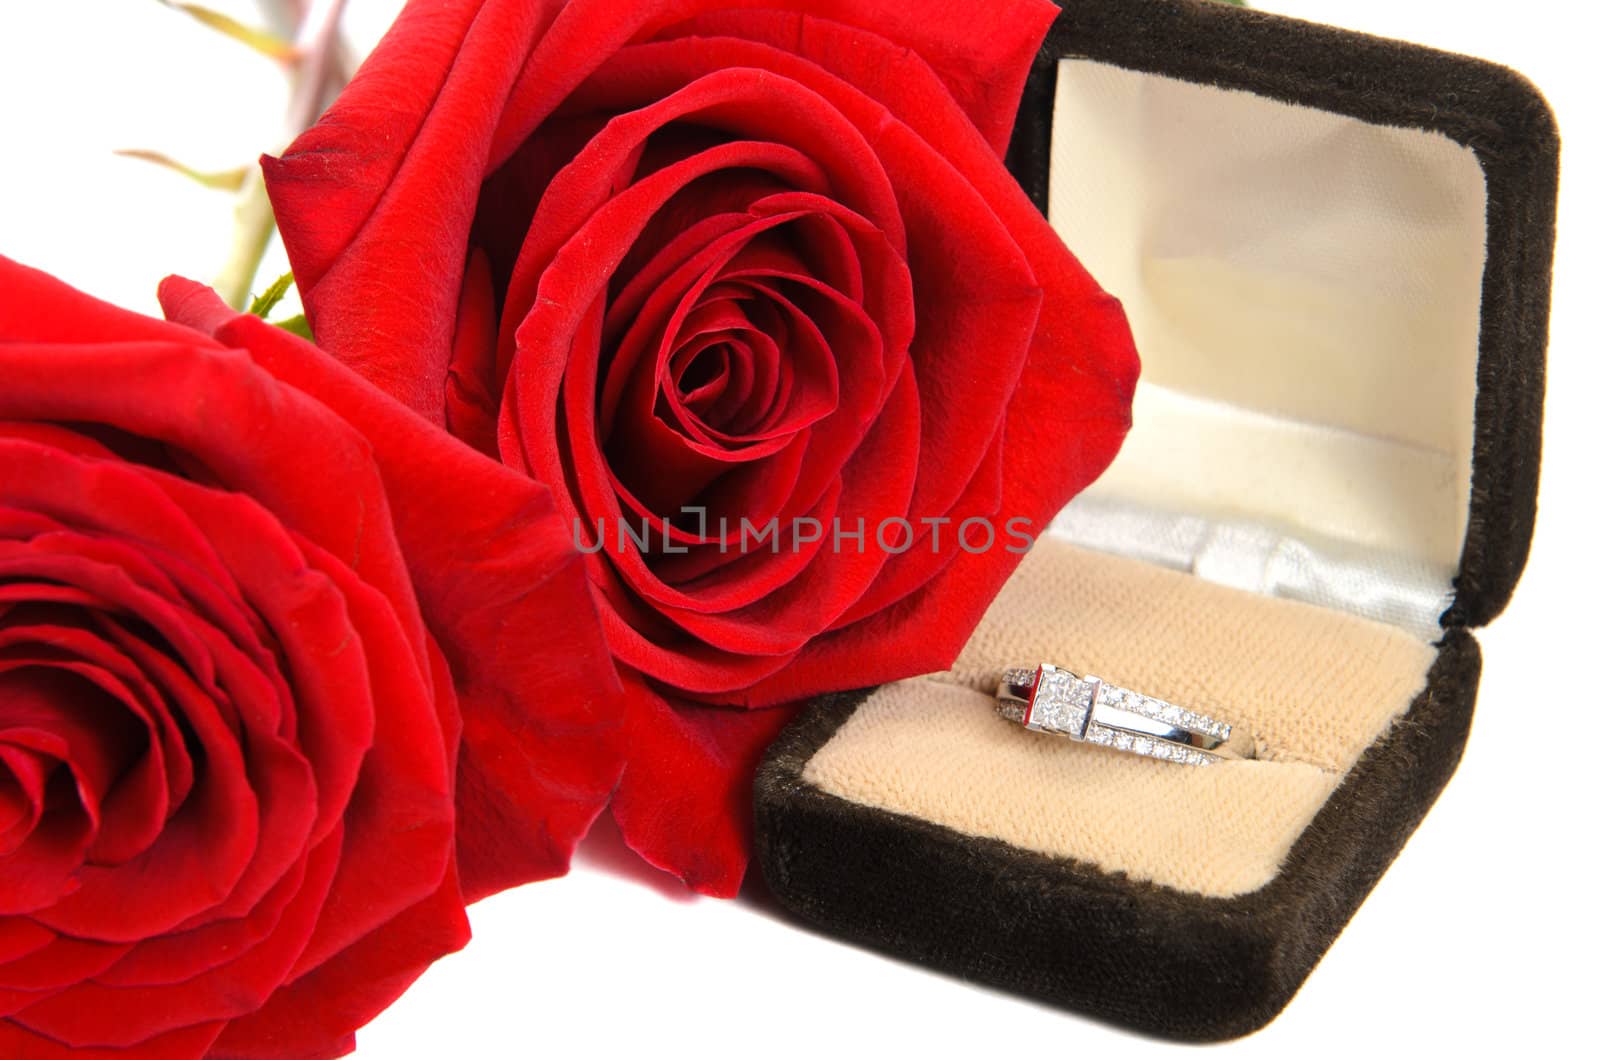 An engagement ring with red roses next to it, isolated against a white background.